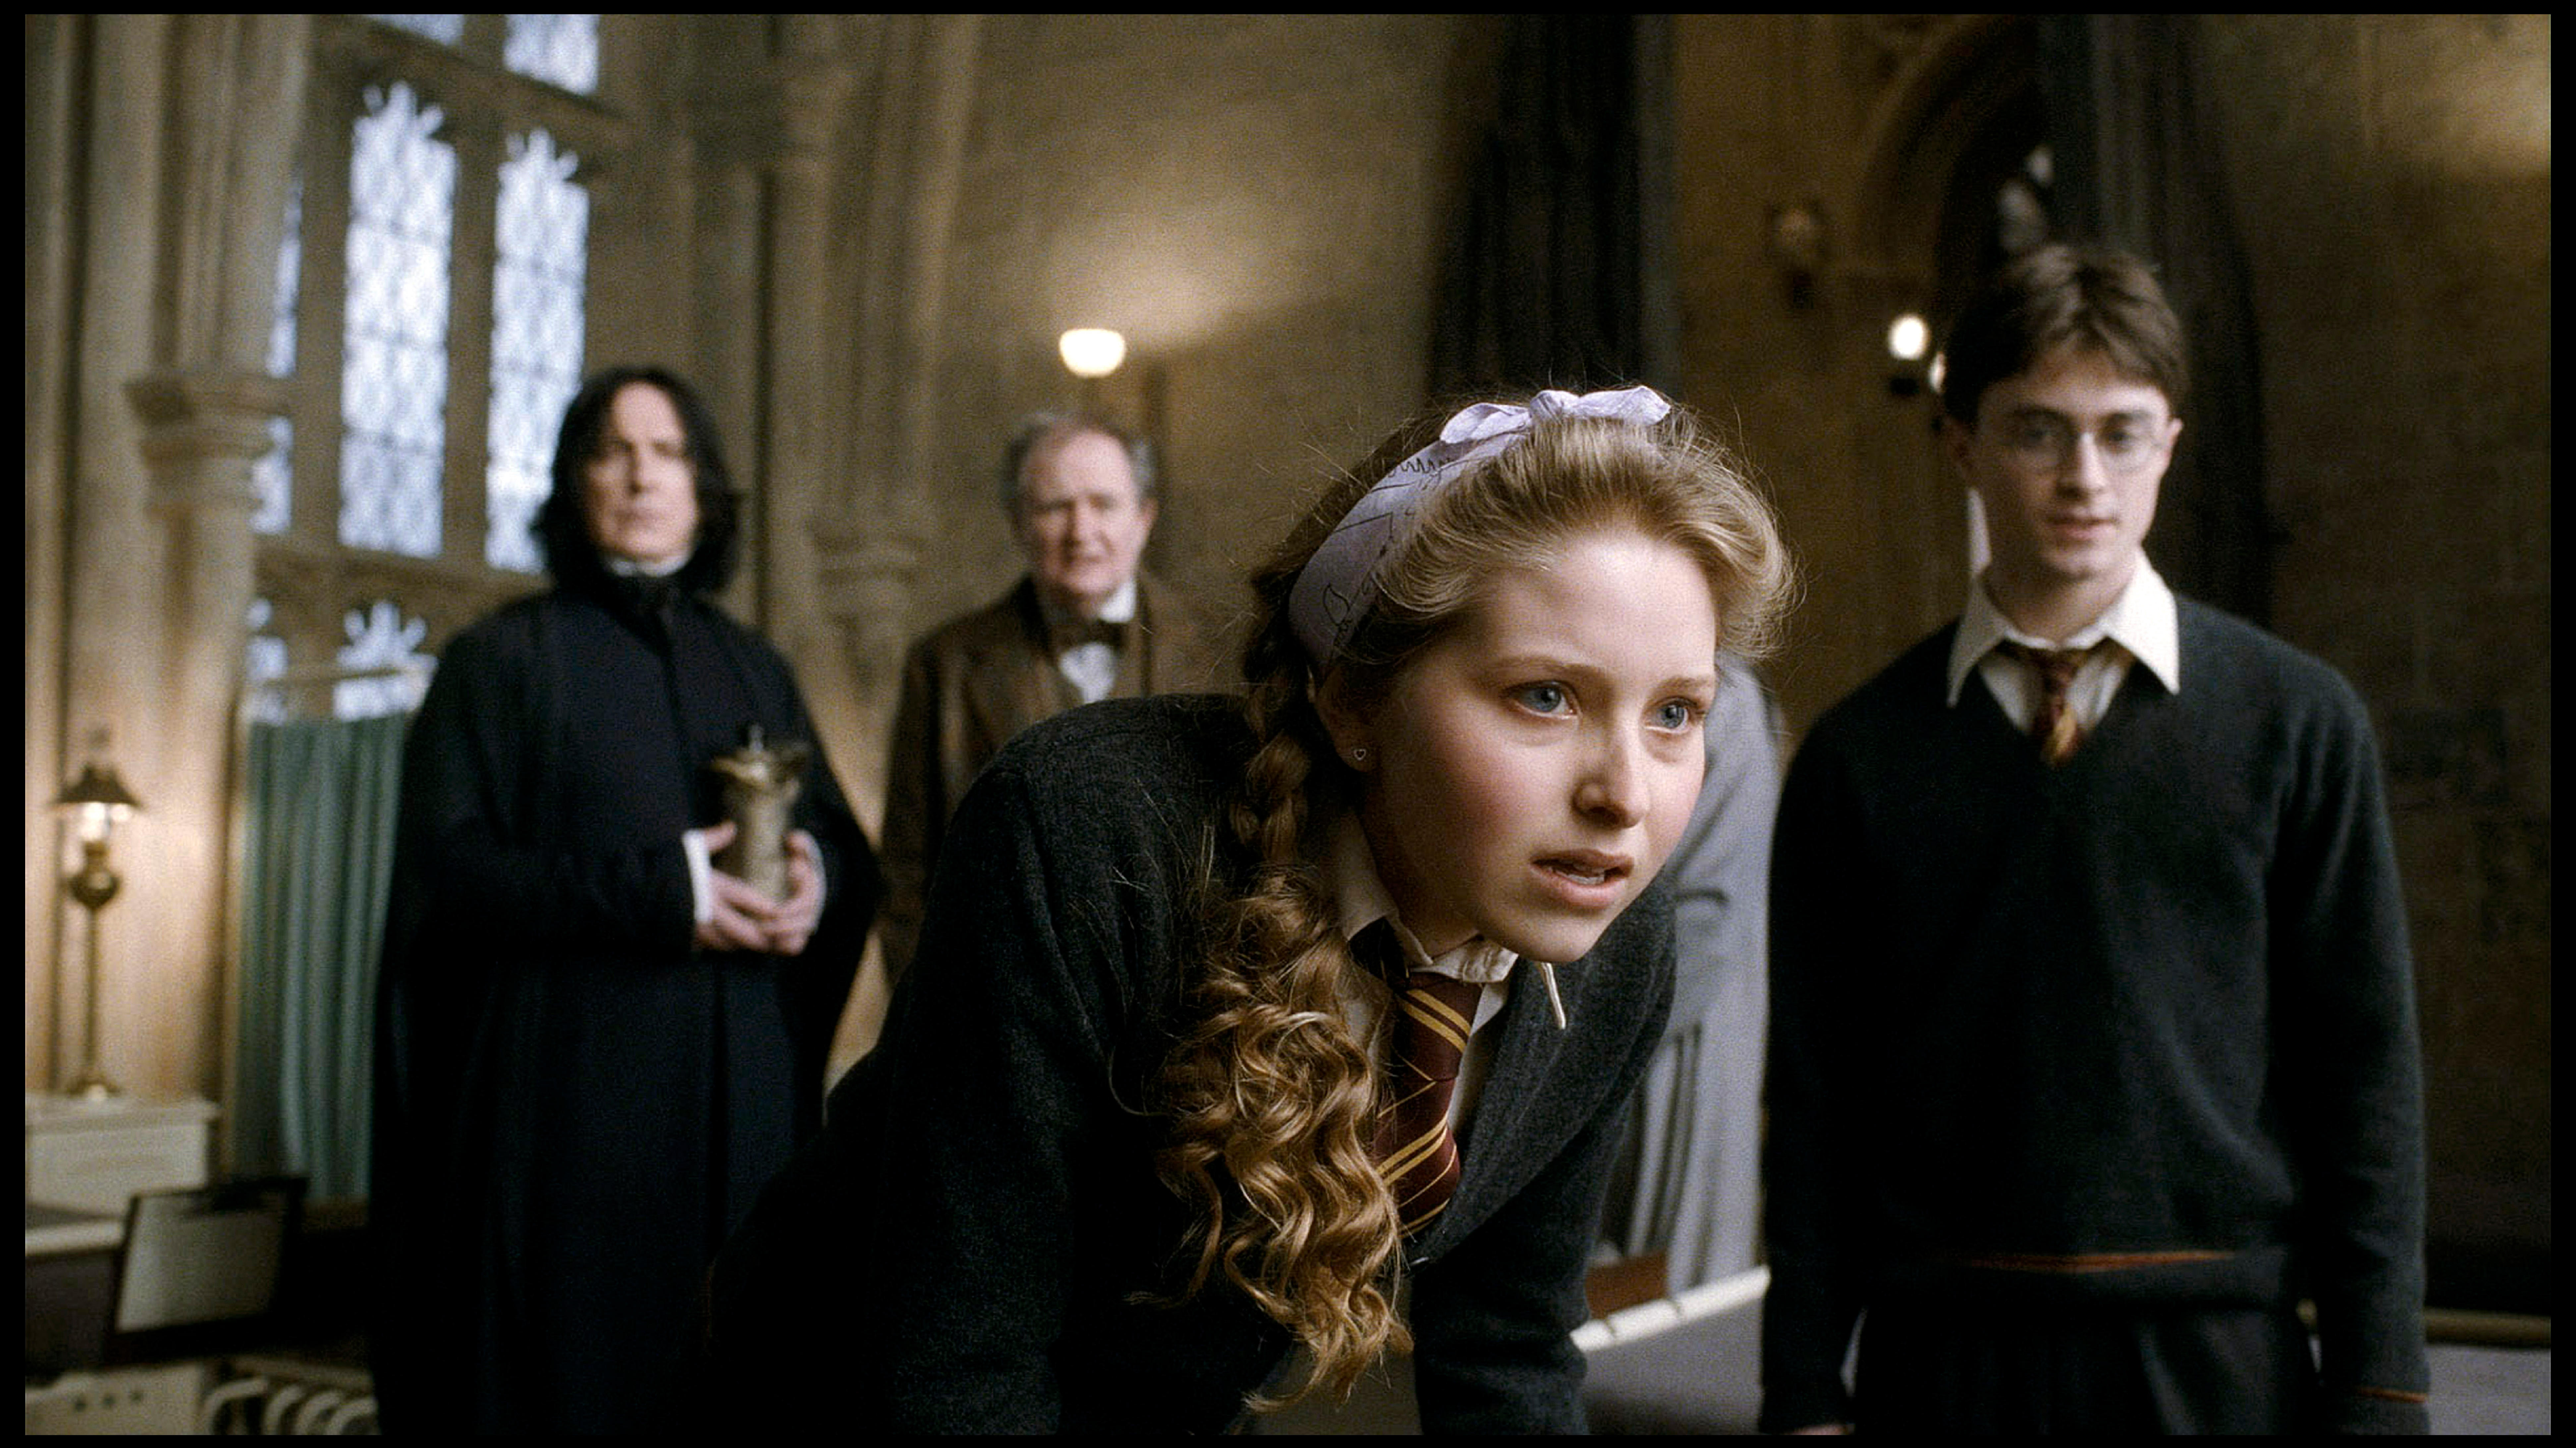 Jessie played Lavender Brown in the Potter movies